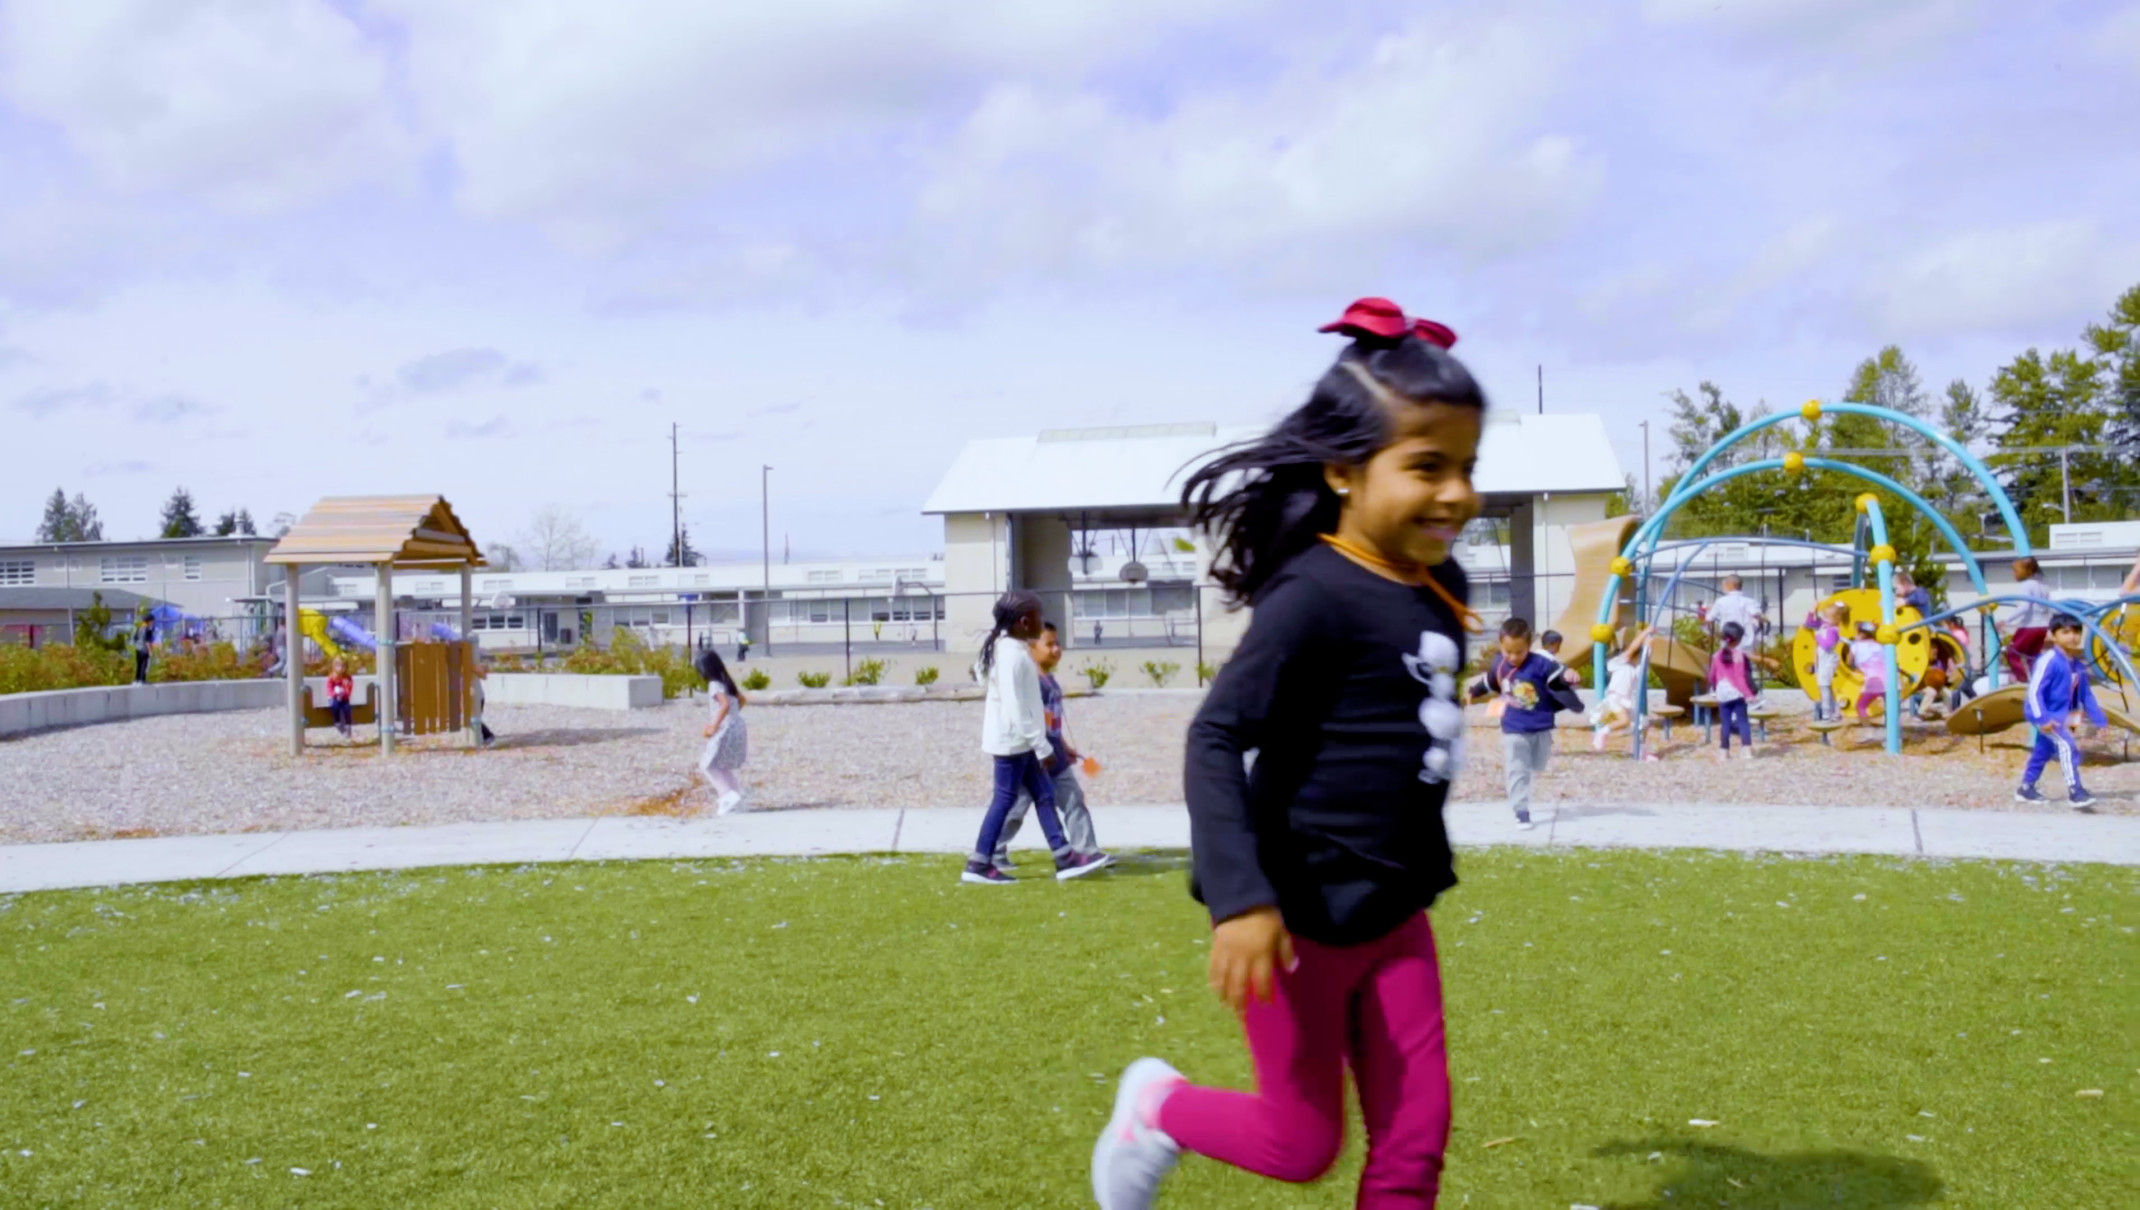 little girl running on an outdoor playground with a play gym in the background and areas for outdoor learning